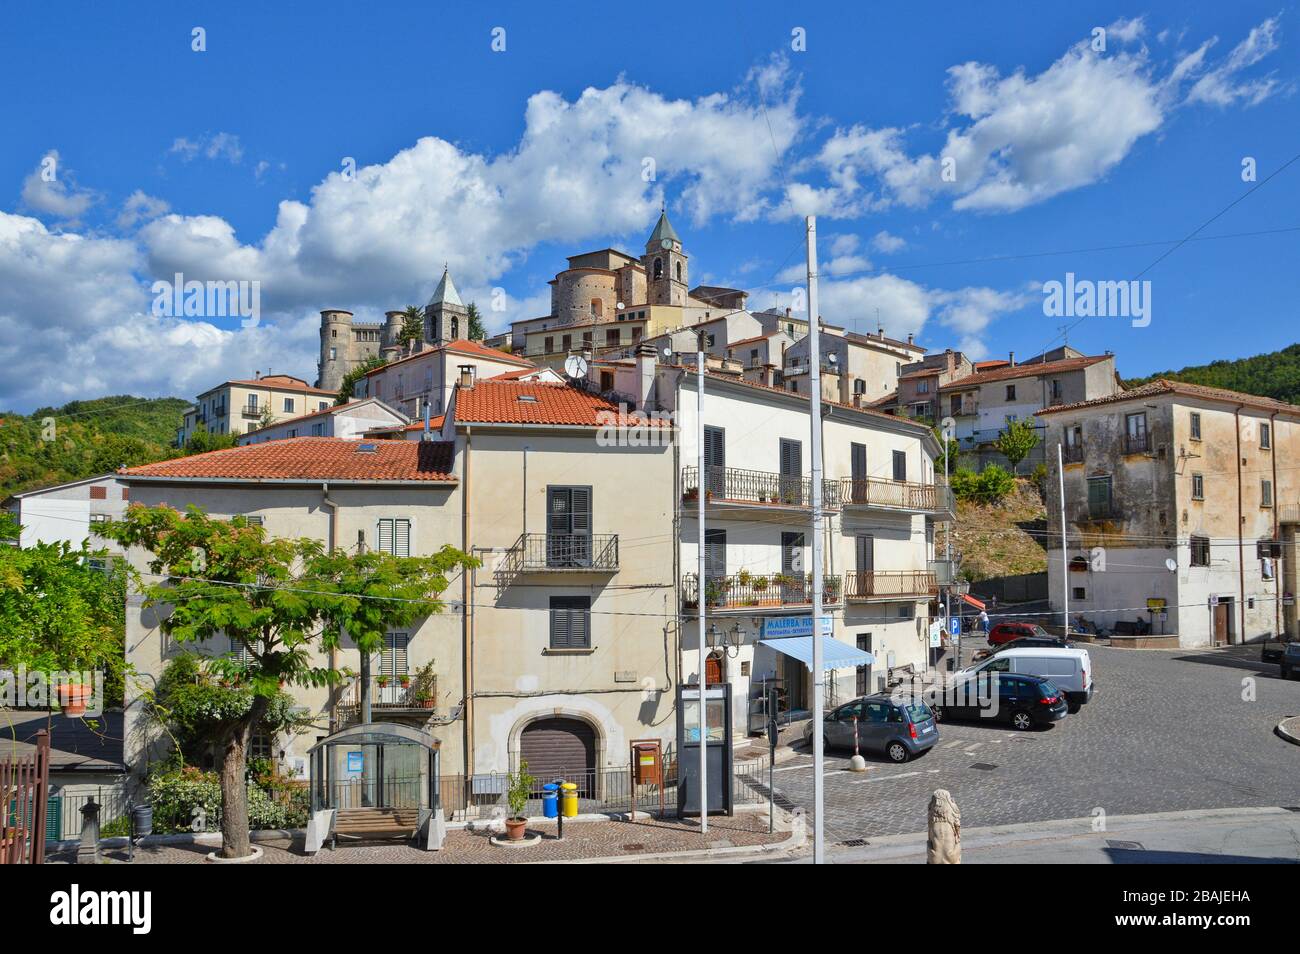 Panoramic view of Carpinone, a village in the Moolise region, Italy Stock Photo